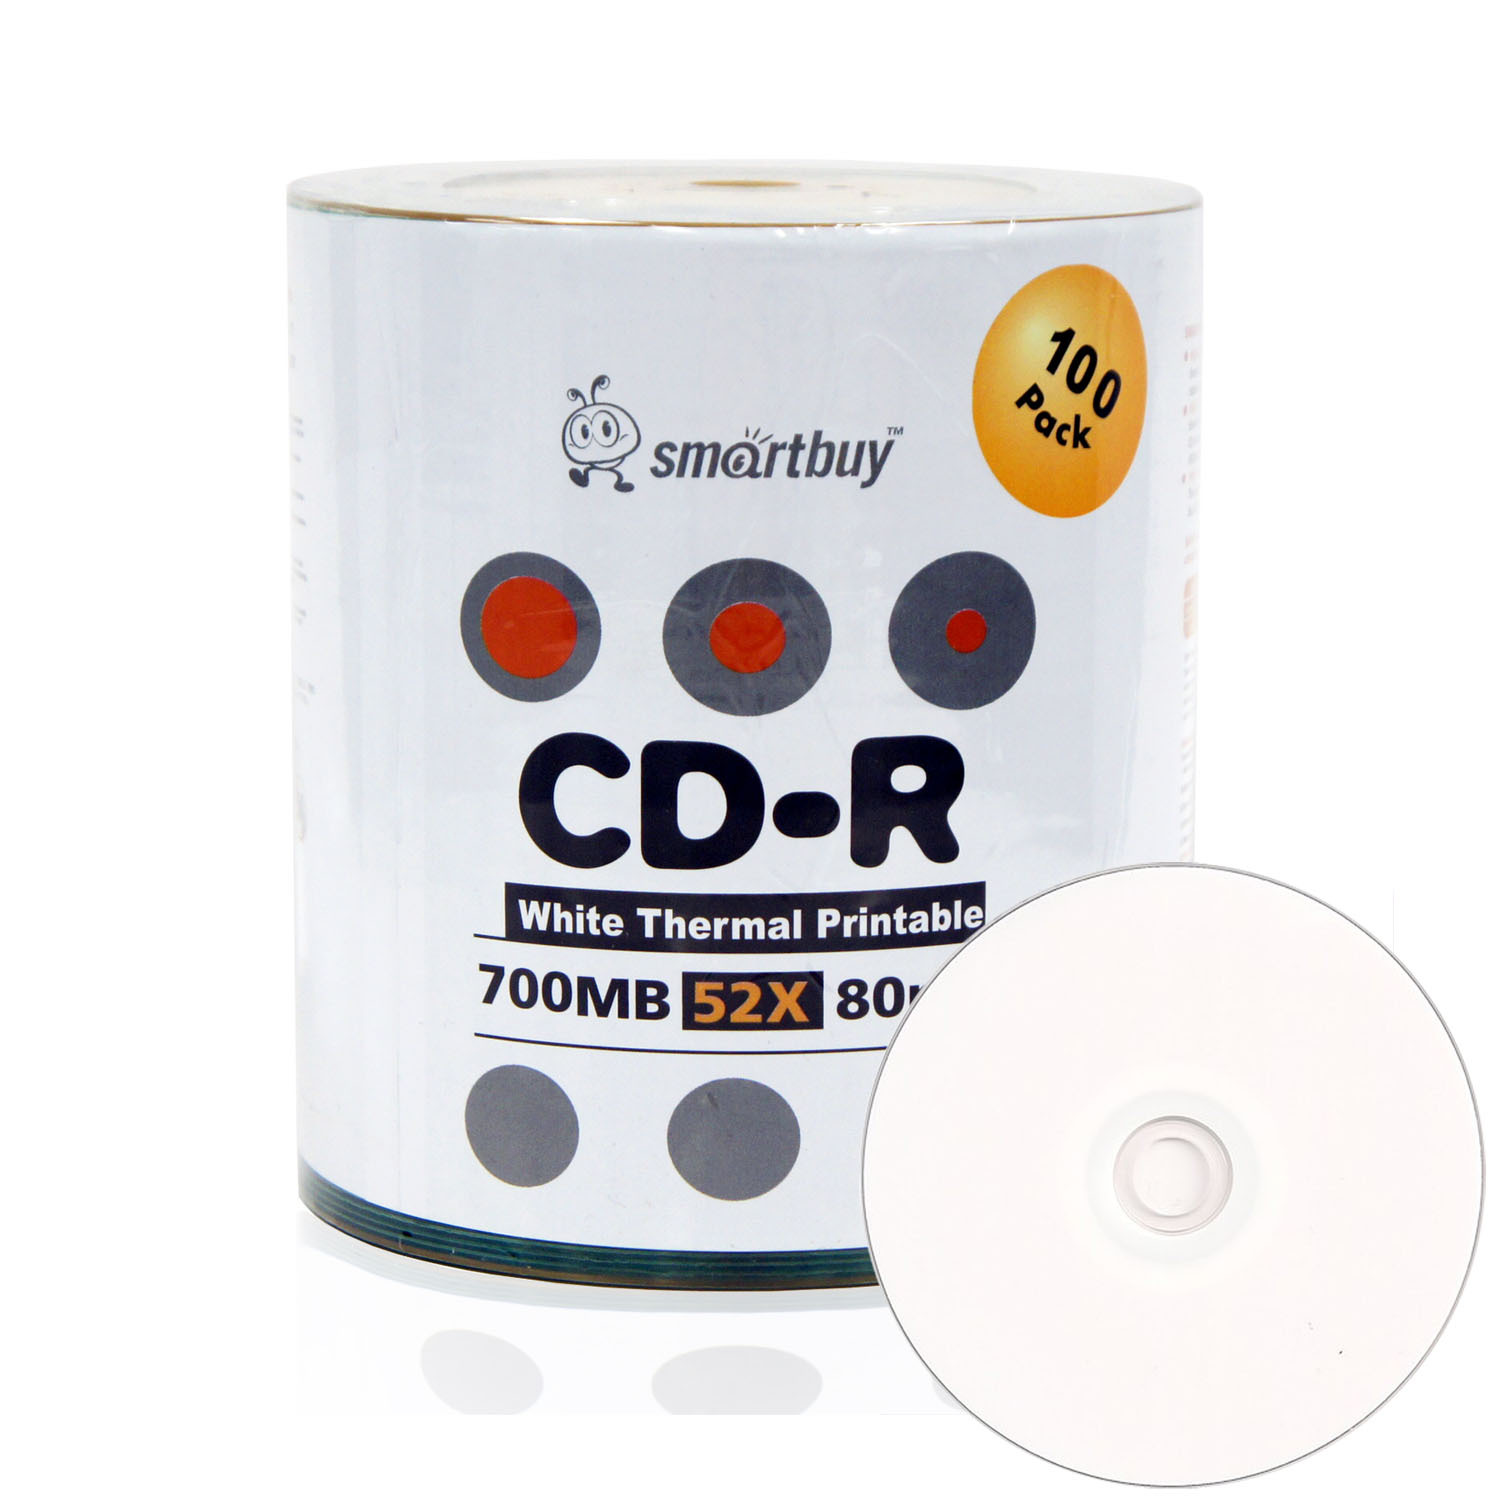 100 Pack Smartbuy 52X CD-R 700MB 80Min White Thermal Printable Blank Record Disc - $24.99